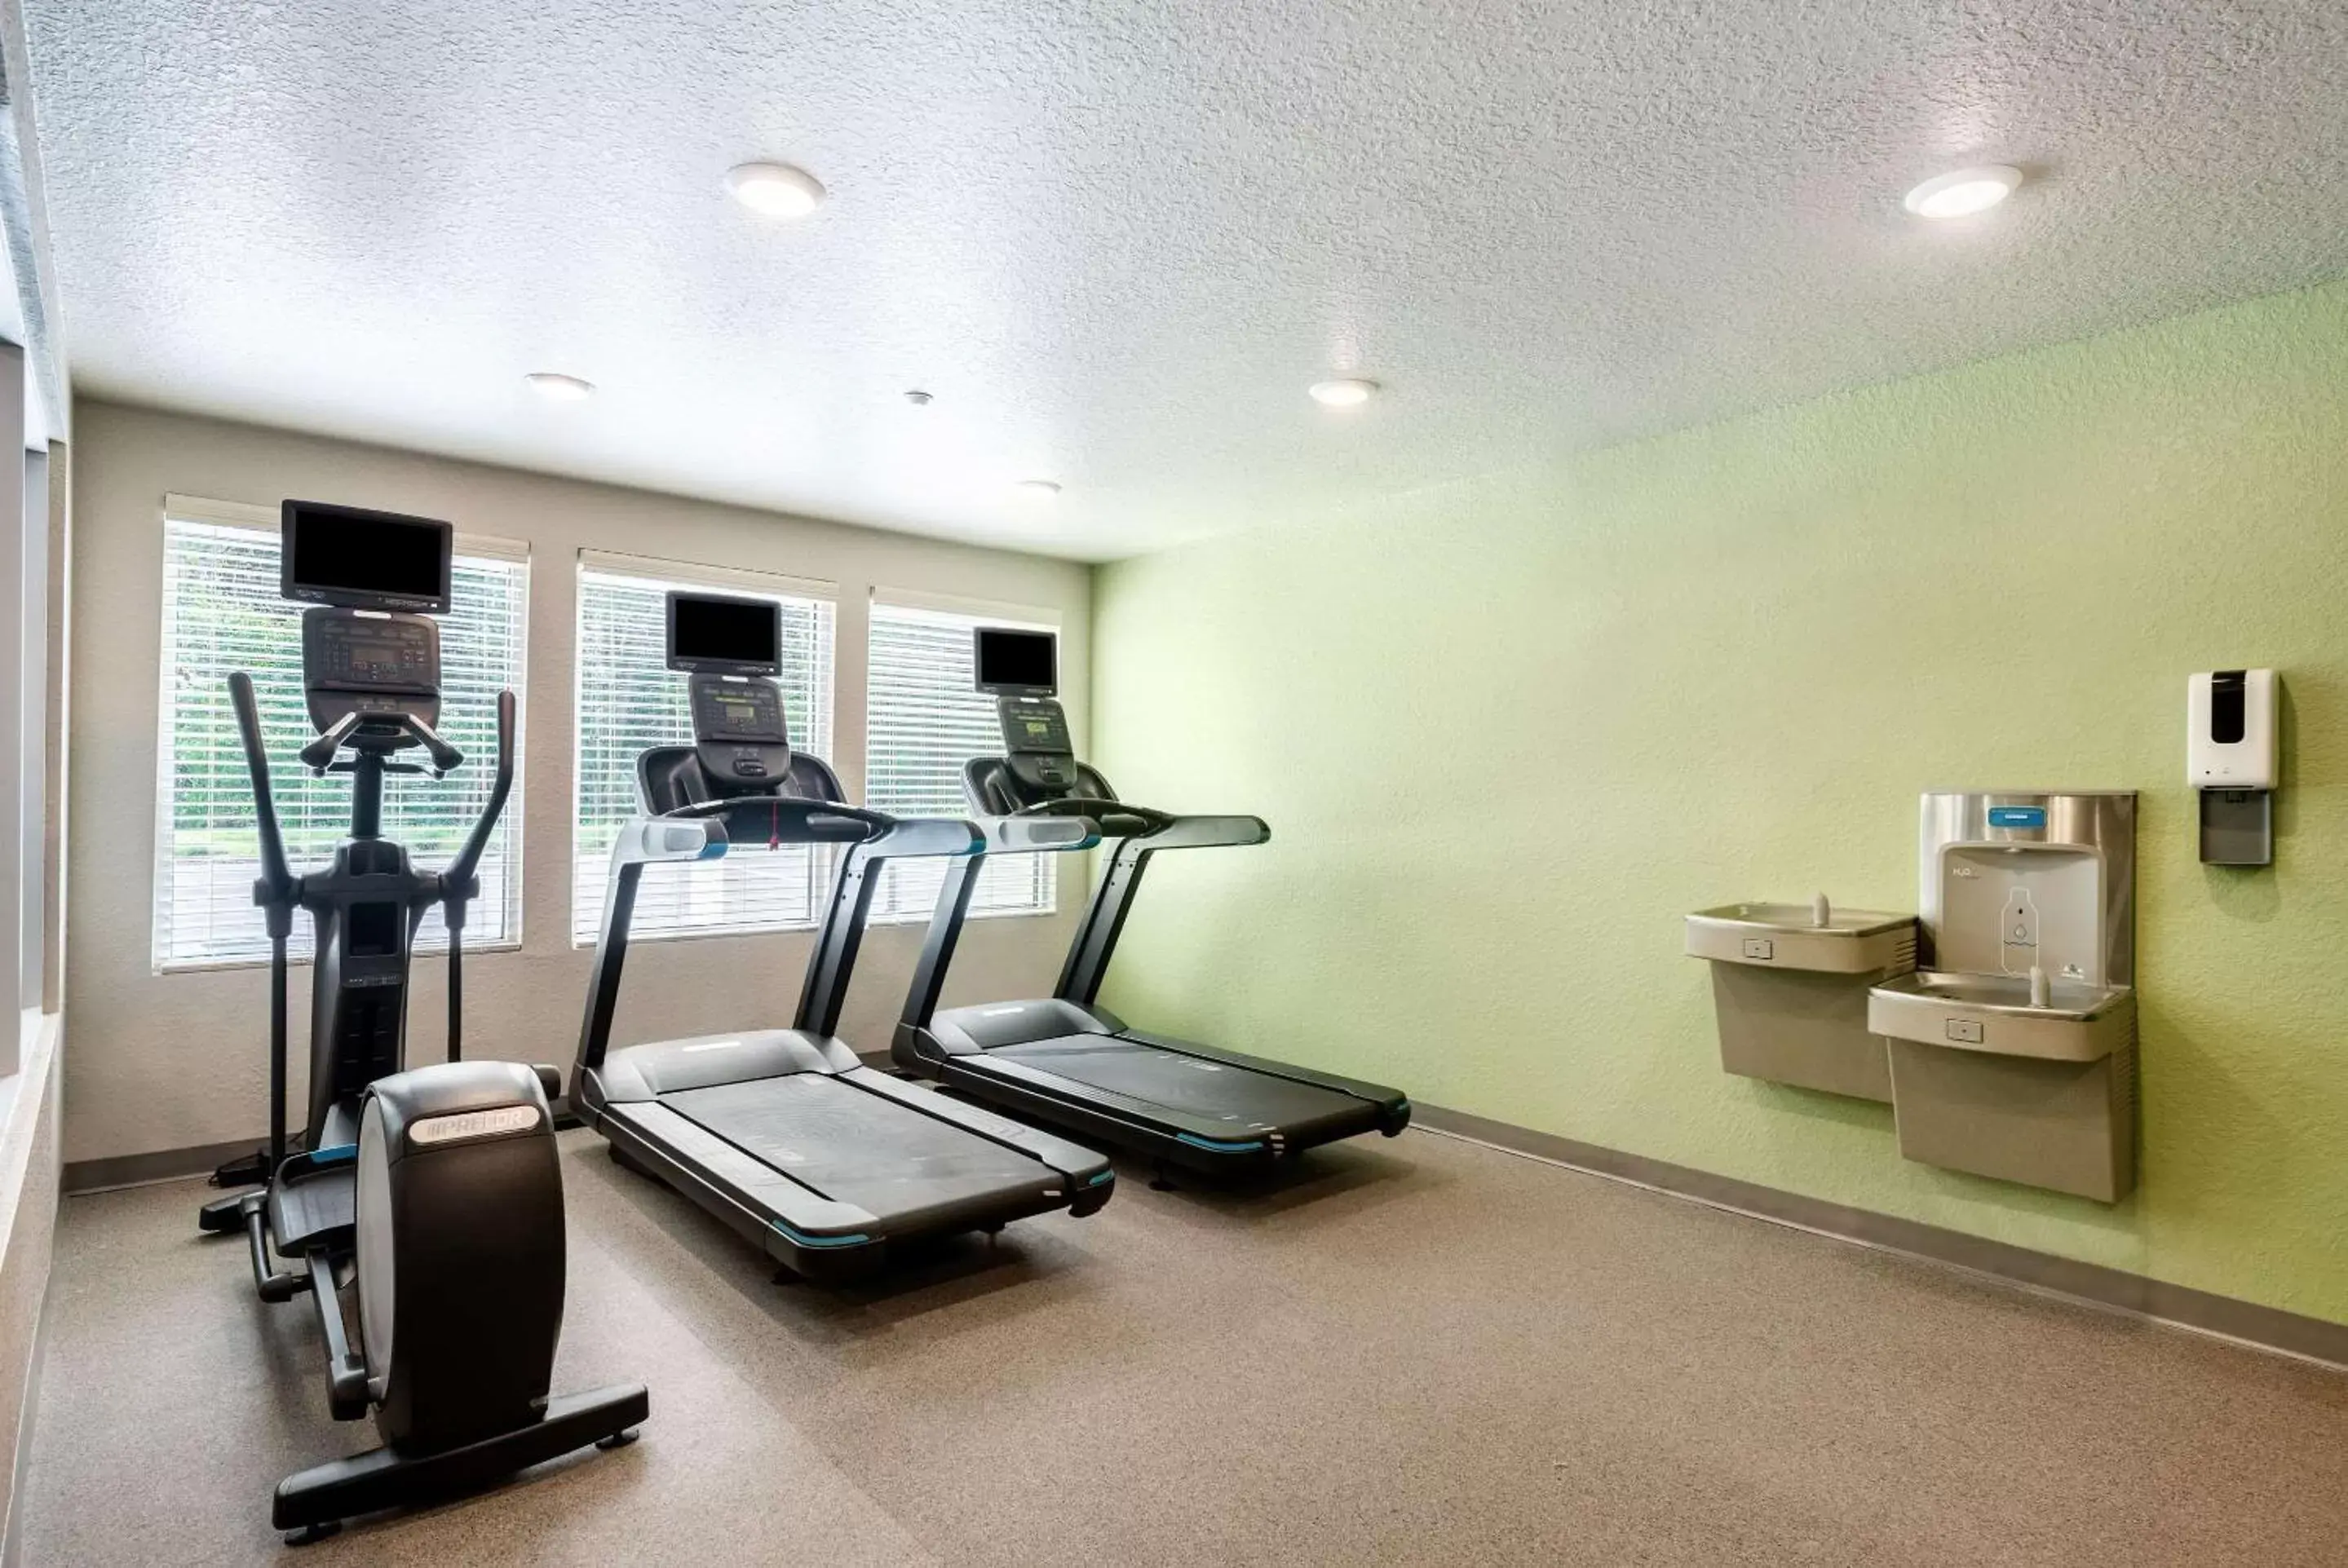 Fitness centre/facilities, Fitness Center/Facilities in WoodSpring Suites Sanford North I-4 Orlando Area